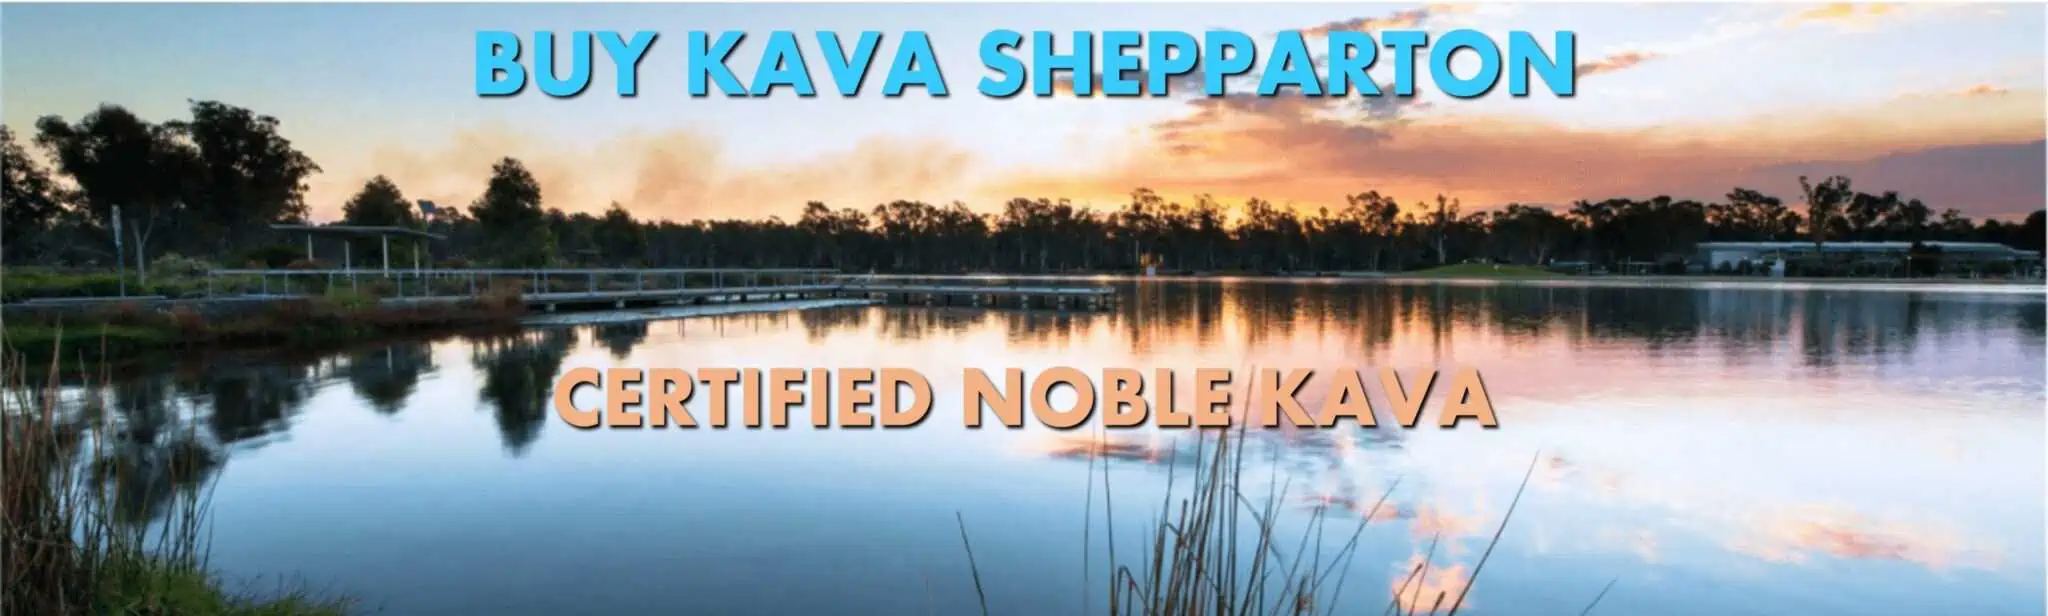 Peaceful lake scene at sunset in Shepparton Victoria with caption Buy Kava Shepparton Certified Noble Kava